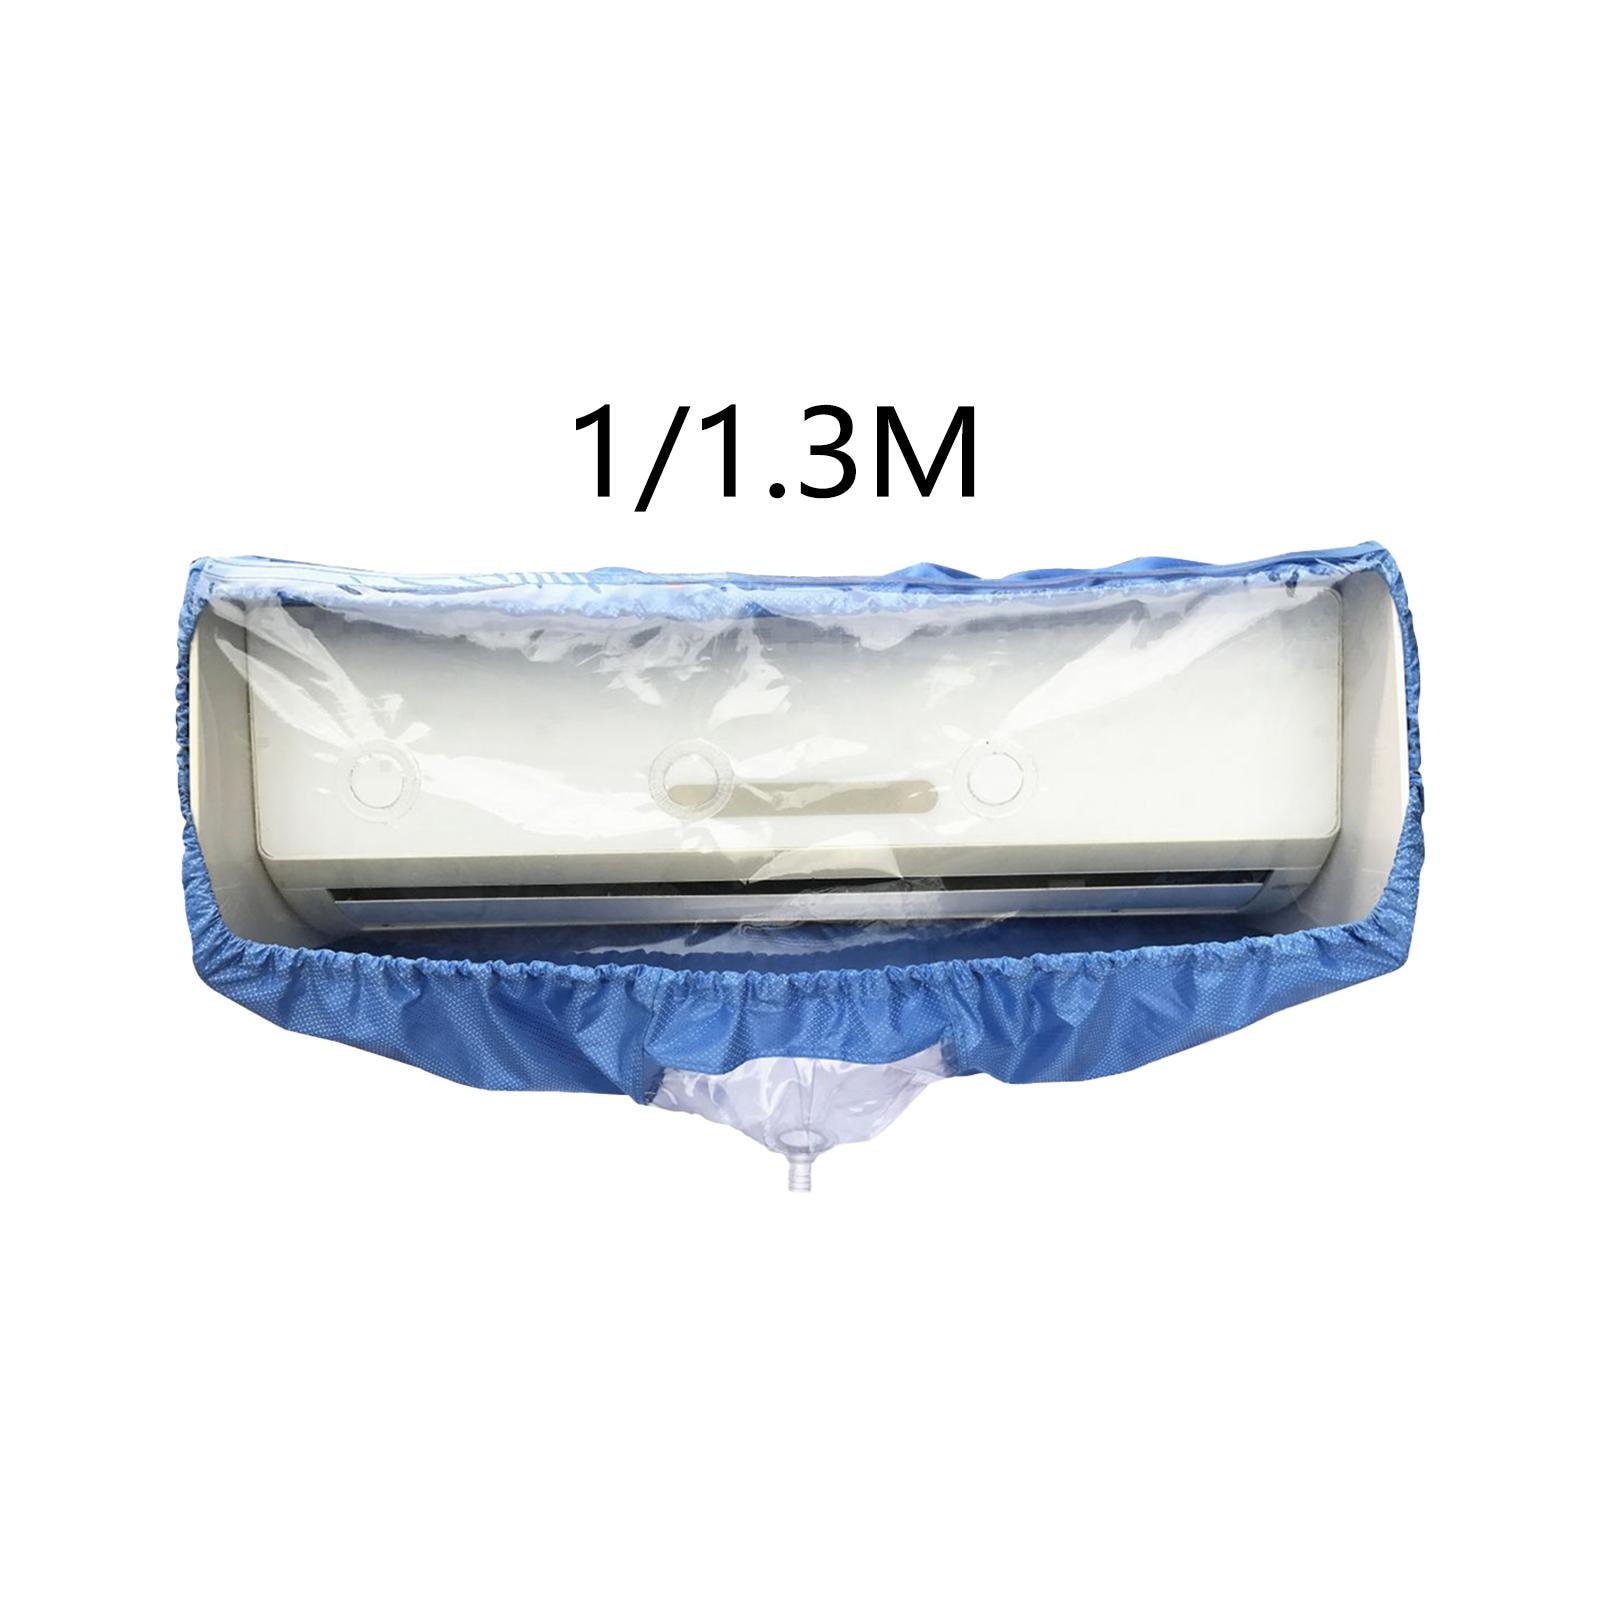 Air Conditioning Service Bag Waterproof Dustproof Waterproof Panels Wall Mounted Cover Bag for Hotel Household Shop Industry